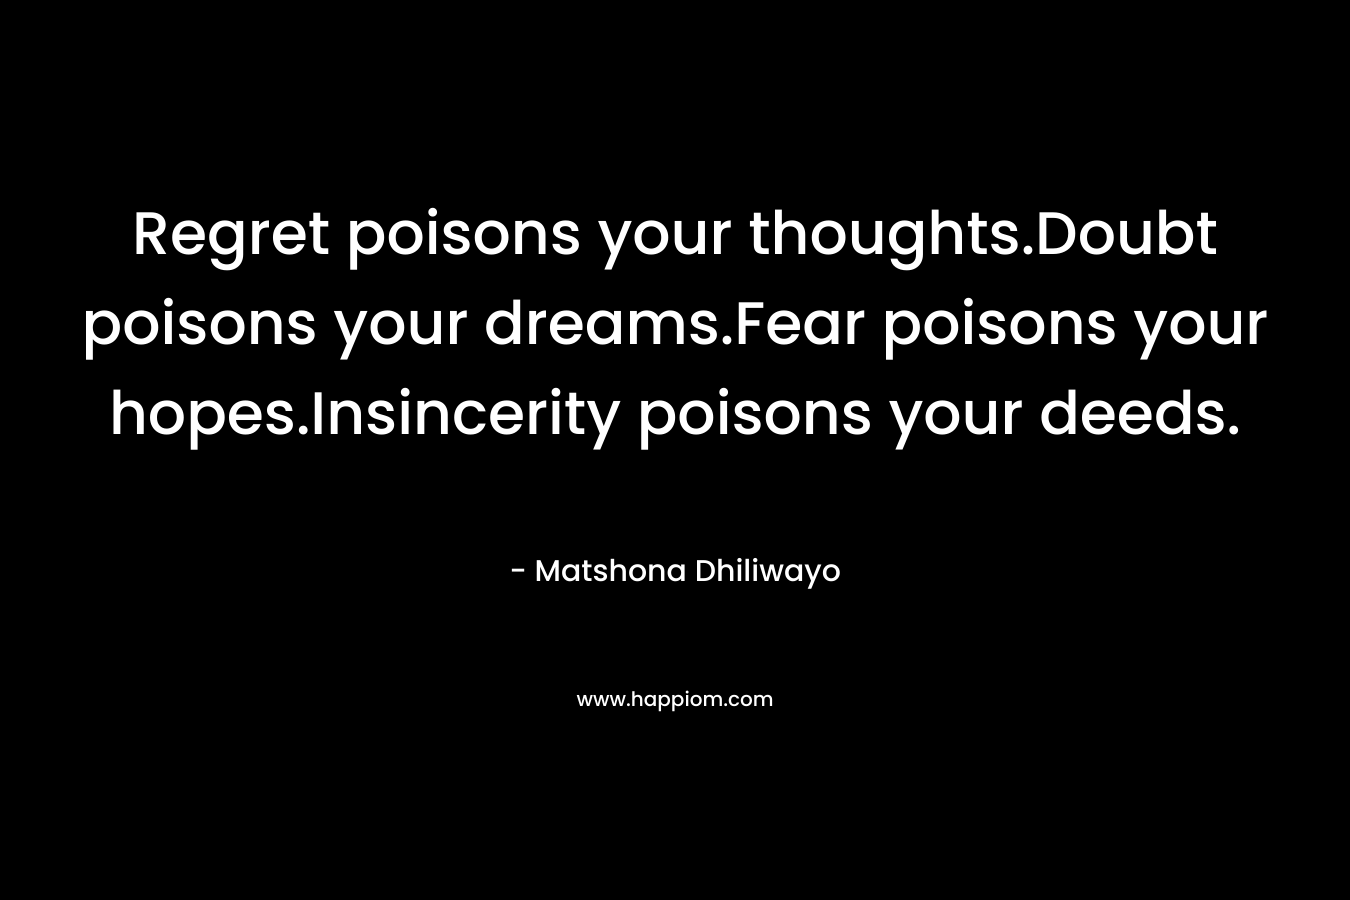 Regret poisons your thoughts.Doubt poisons your dreams.Fear poisons your hopes.Insincerity poisons your deeds. – Matshona Dhiliwayo